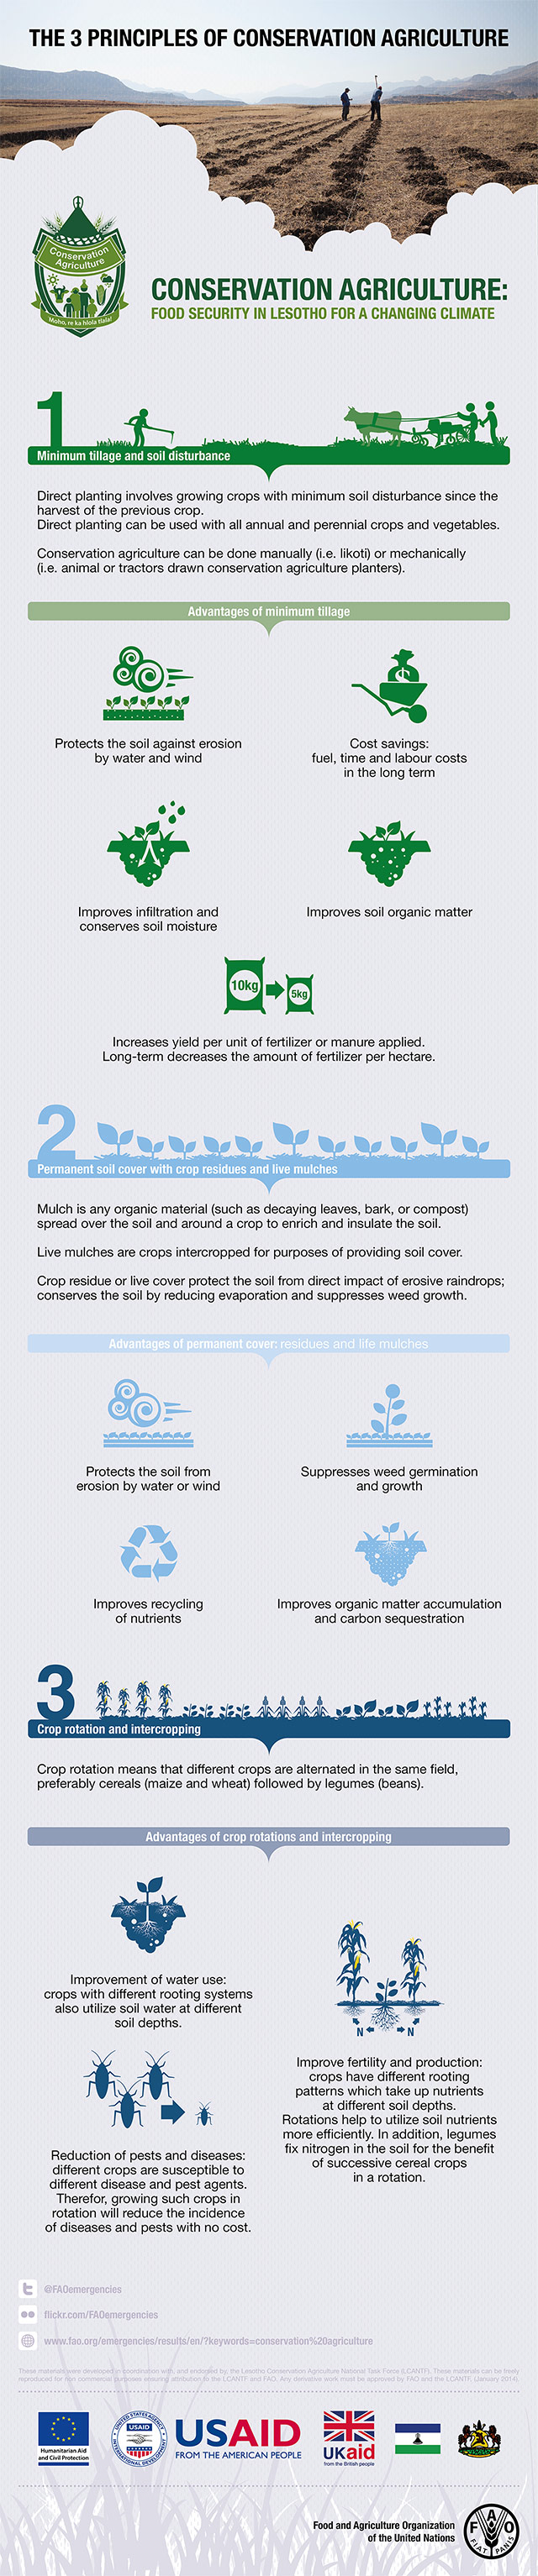 The 3 principles of conservation agriculture - INFOGRAPHIC